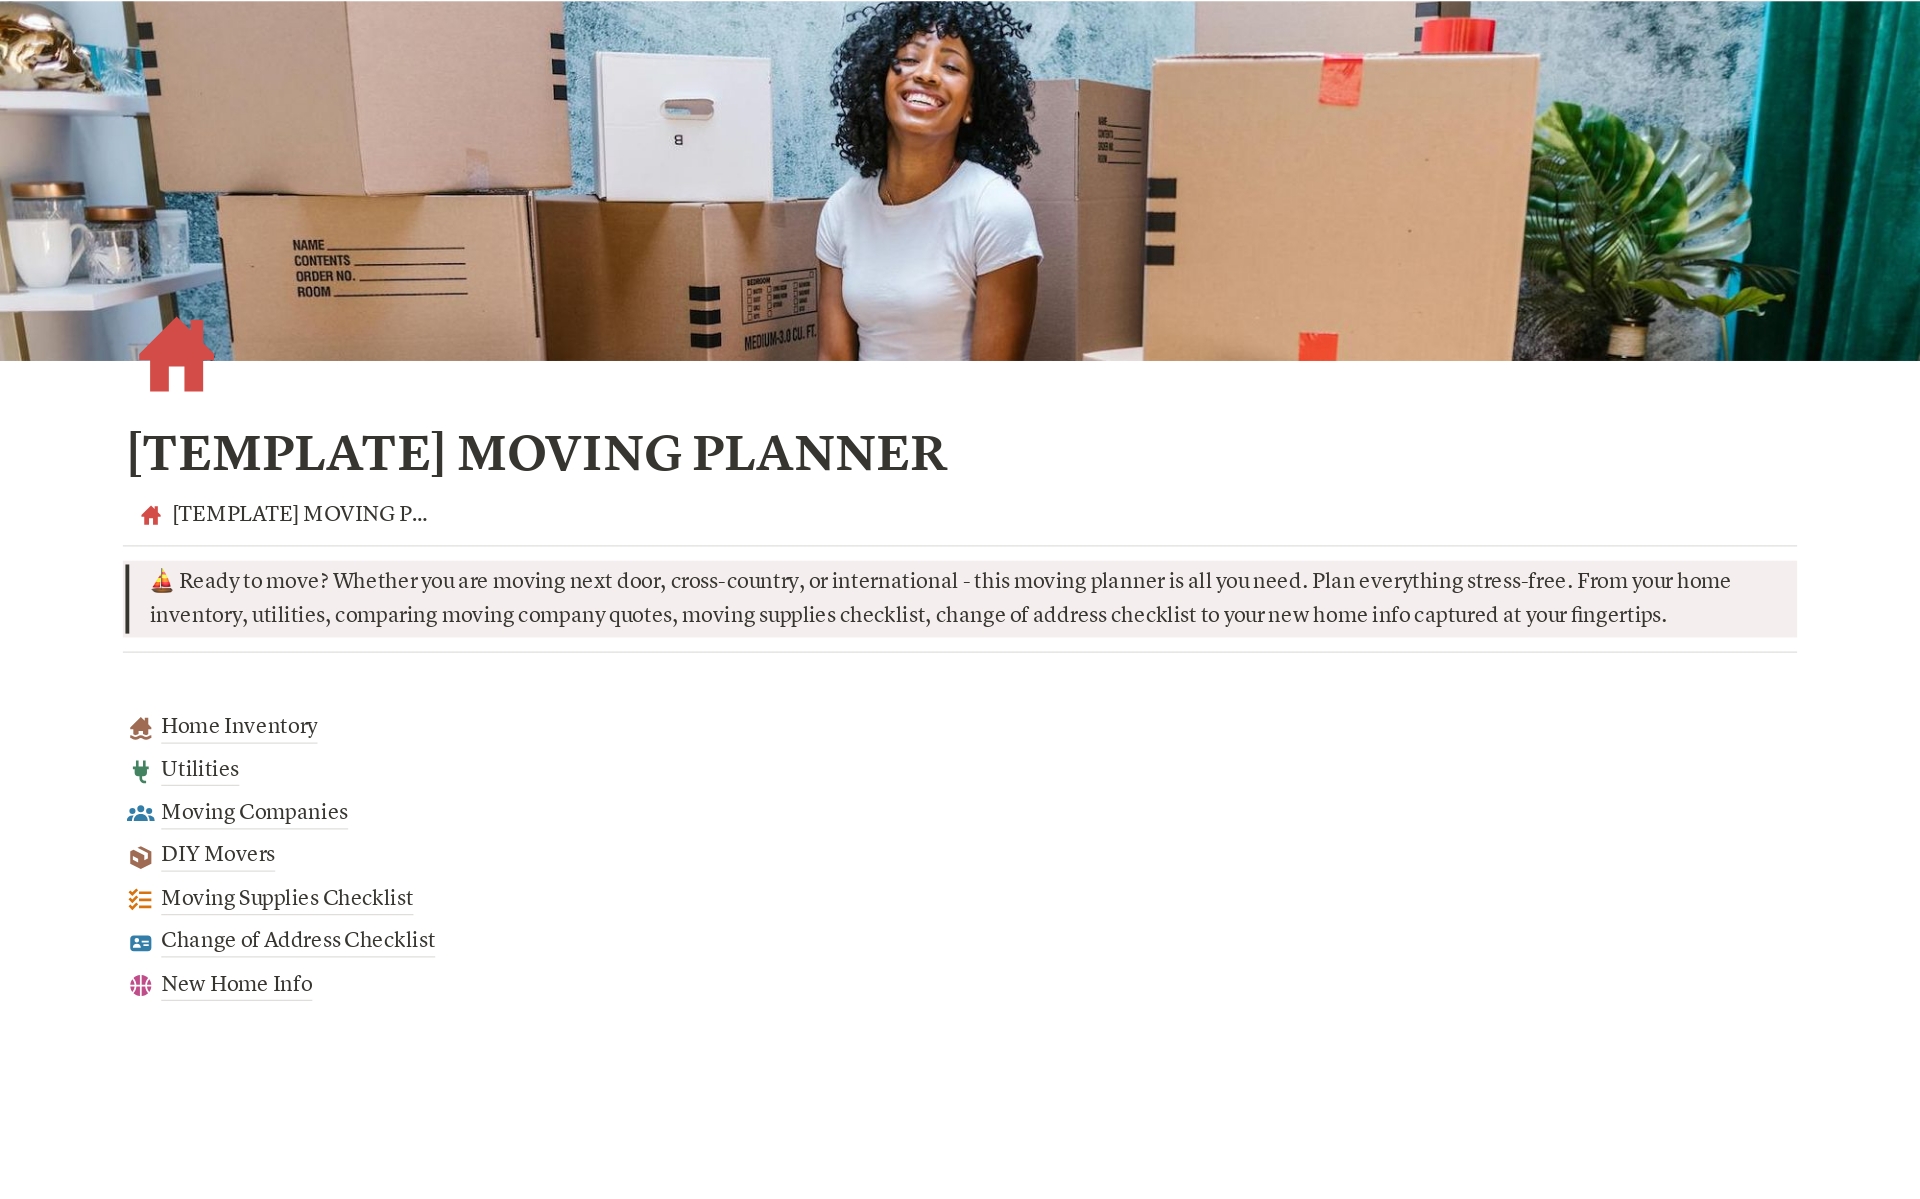 Ready to move? Whether you are moving next door, cross-country, or international - this moving planner is all you need. Plan everything stress-free. From your home inventory, utilities, comparing moving company quotes, moving supplies checklist, change of address checklist to you